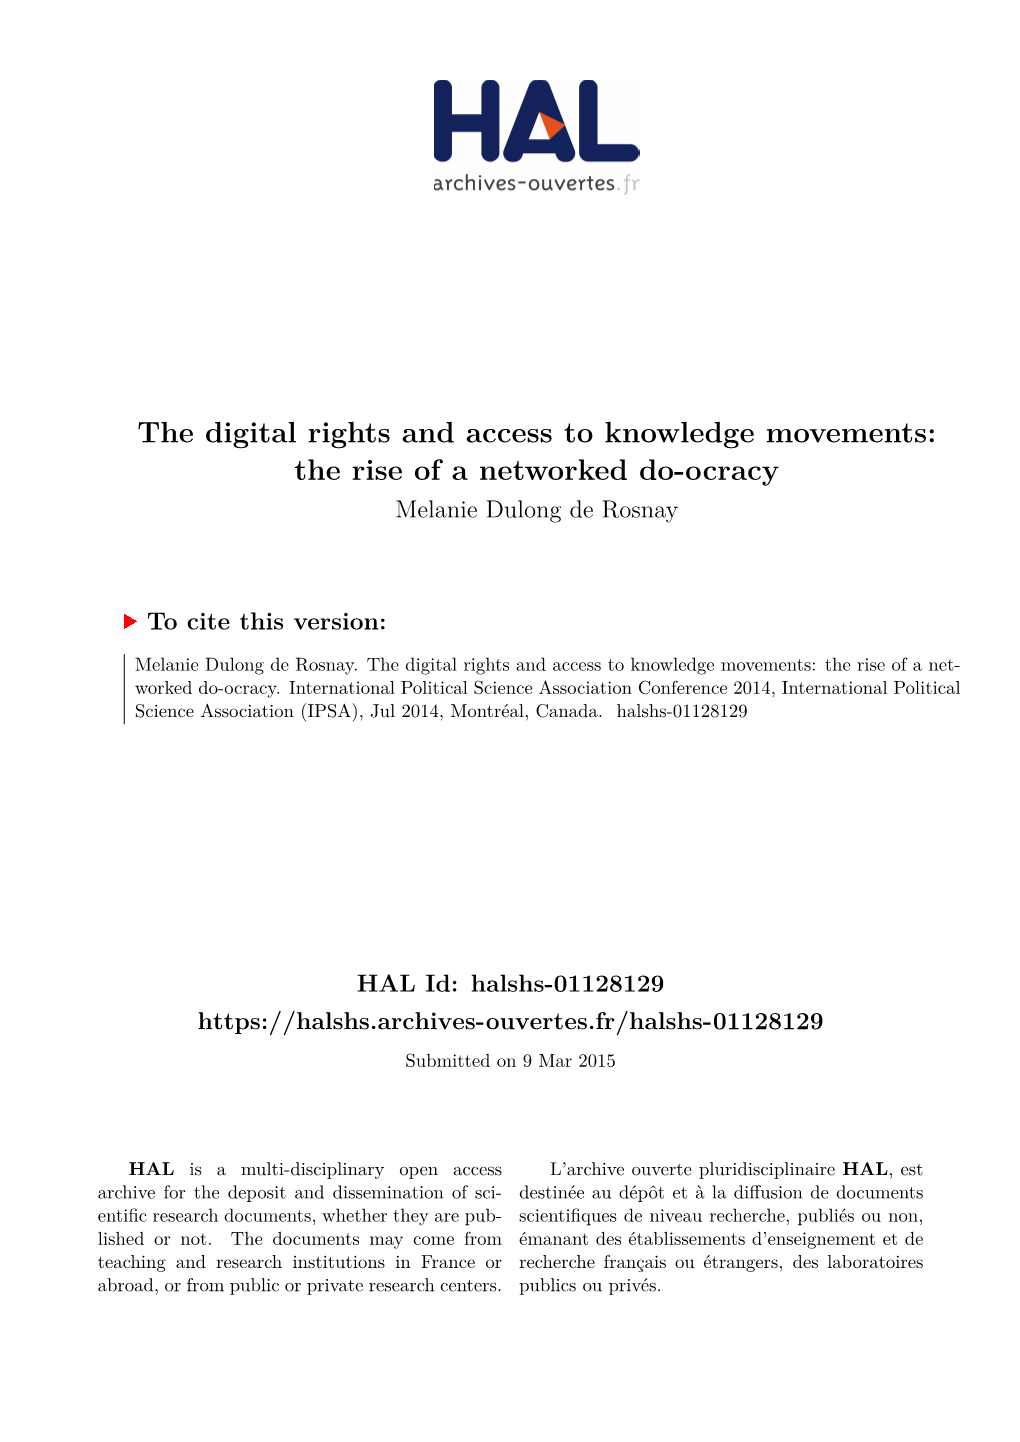 The Digital Rights and Access to Knowledge Movements: the Rise of a Networked Do-Ocracy Melanie Dulong De Rosnay